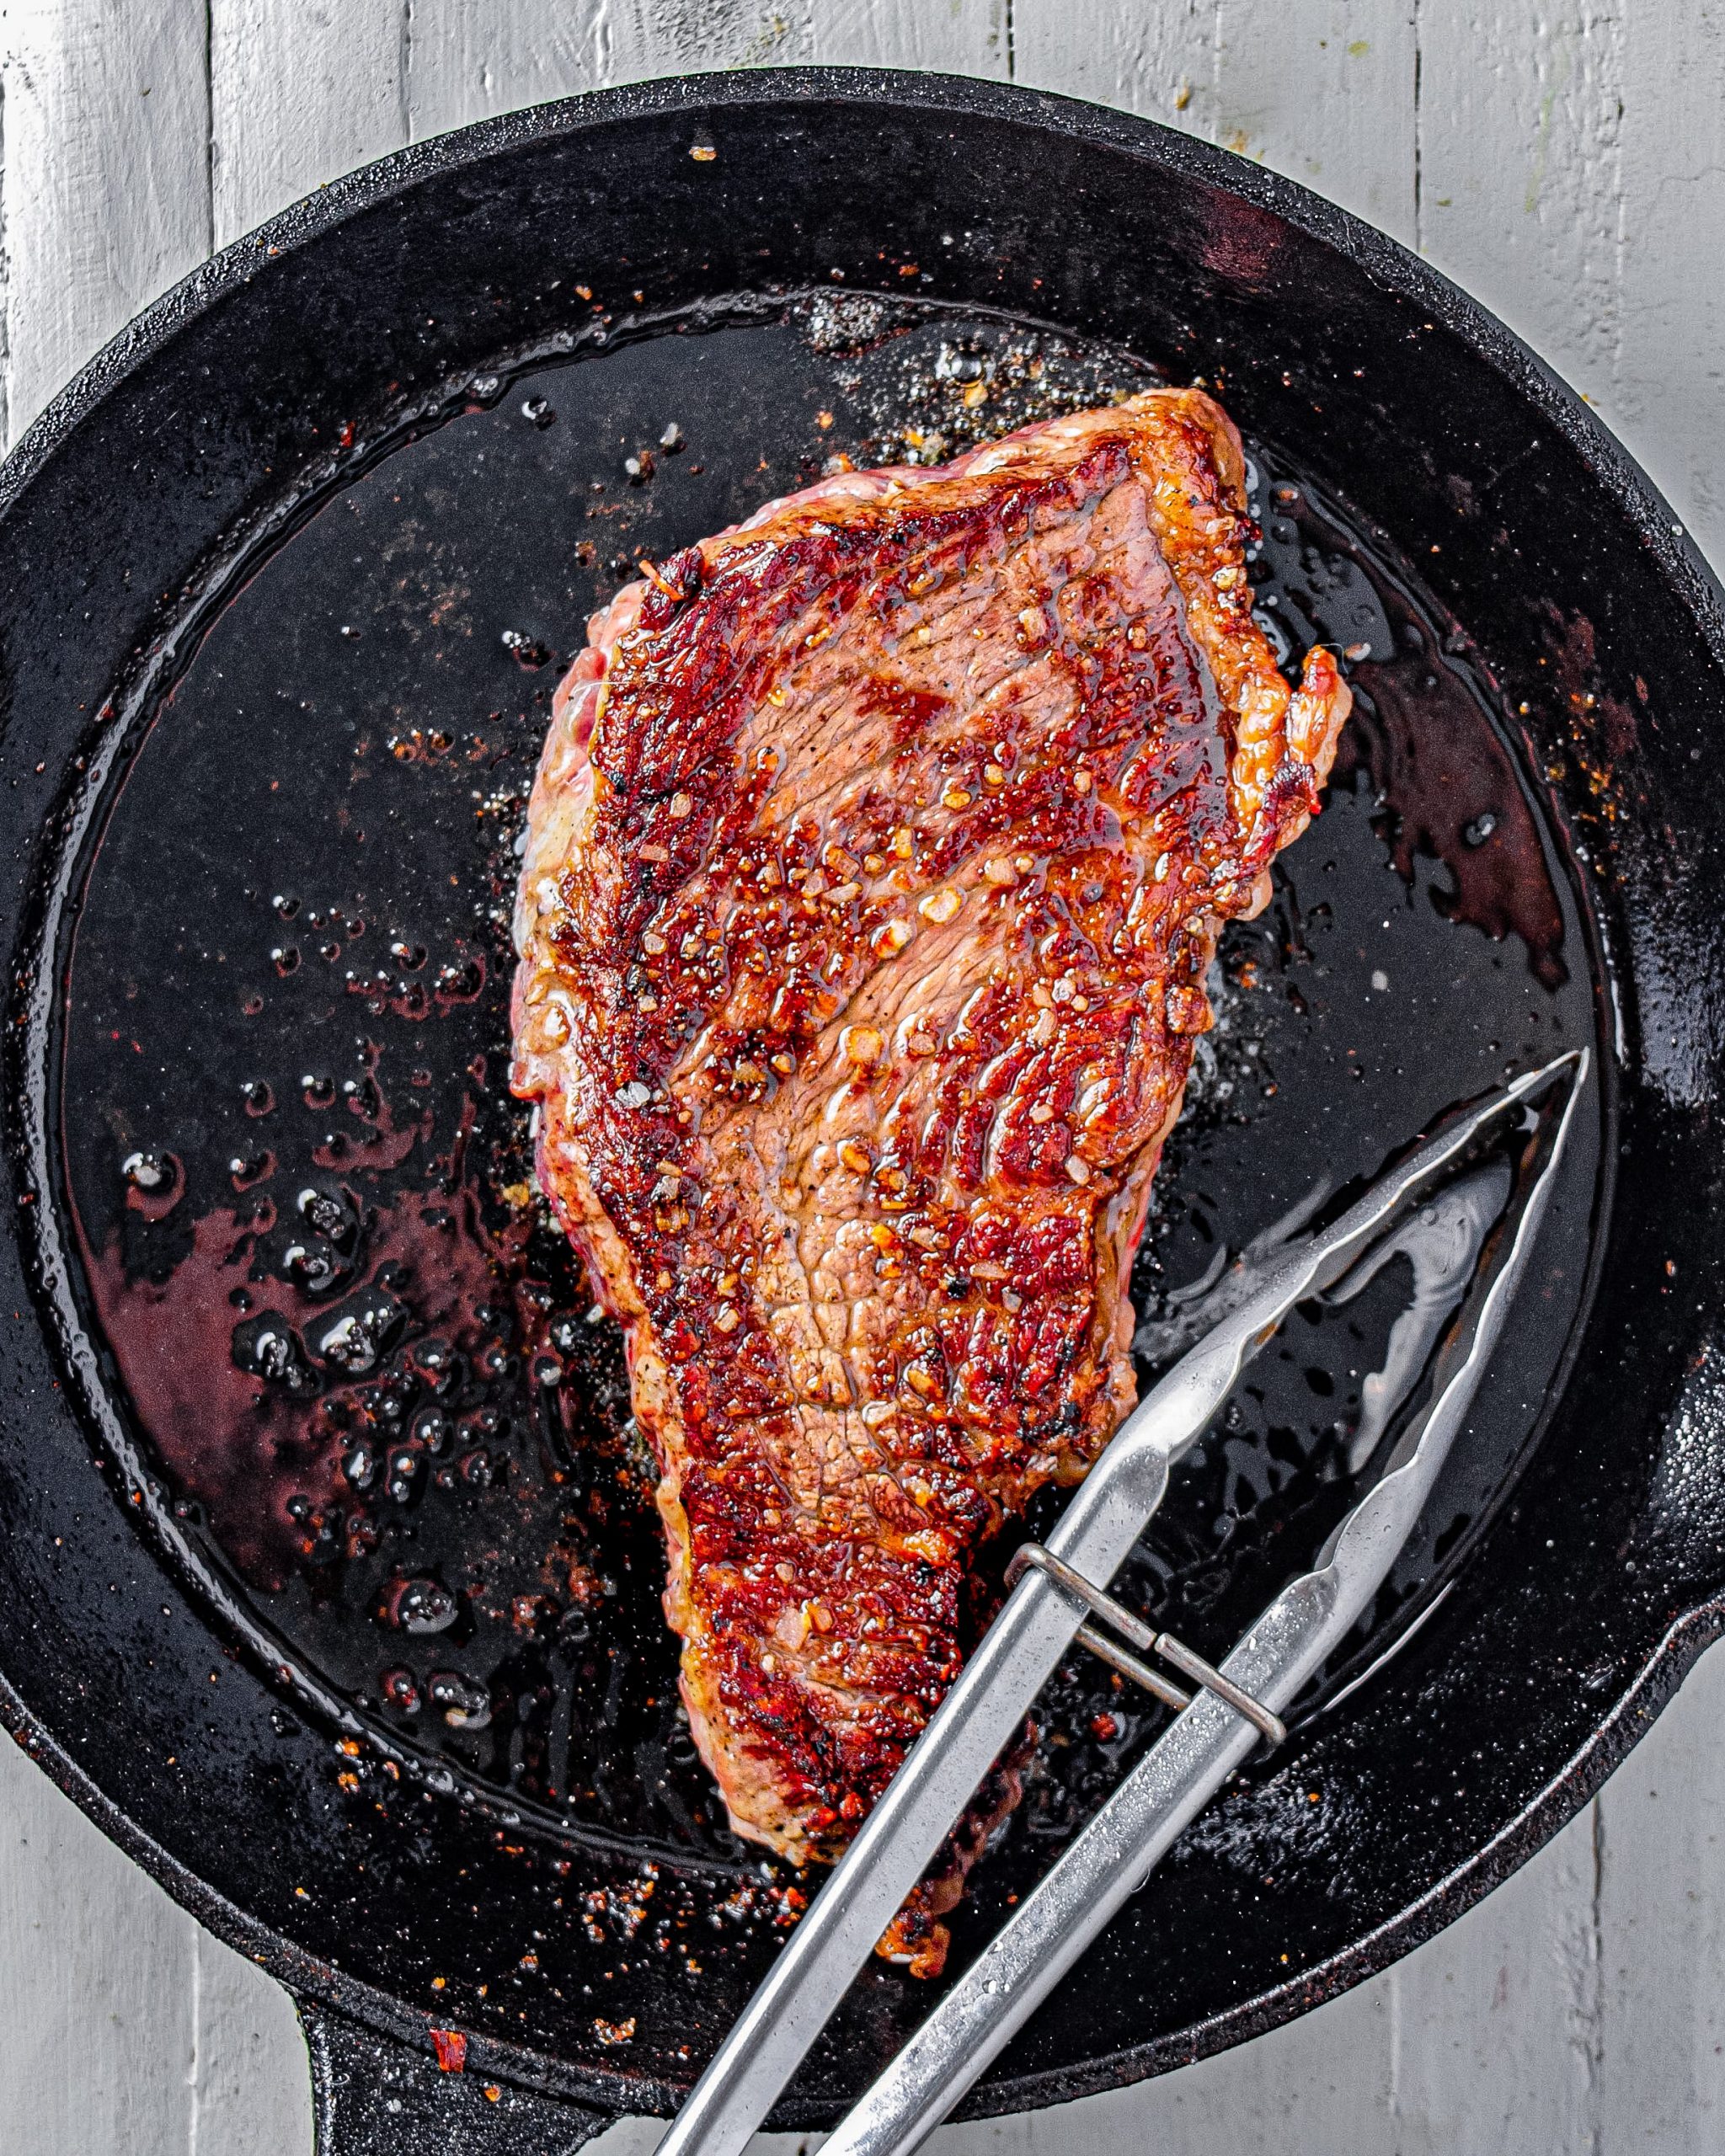 Sear the steak well on both sides, and cook until done to your liking. 